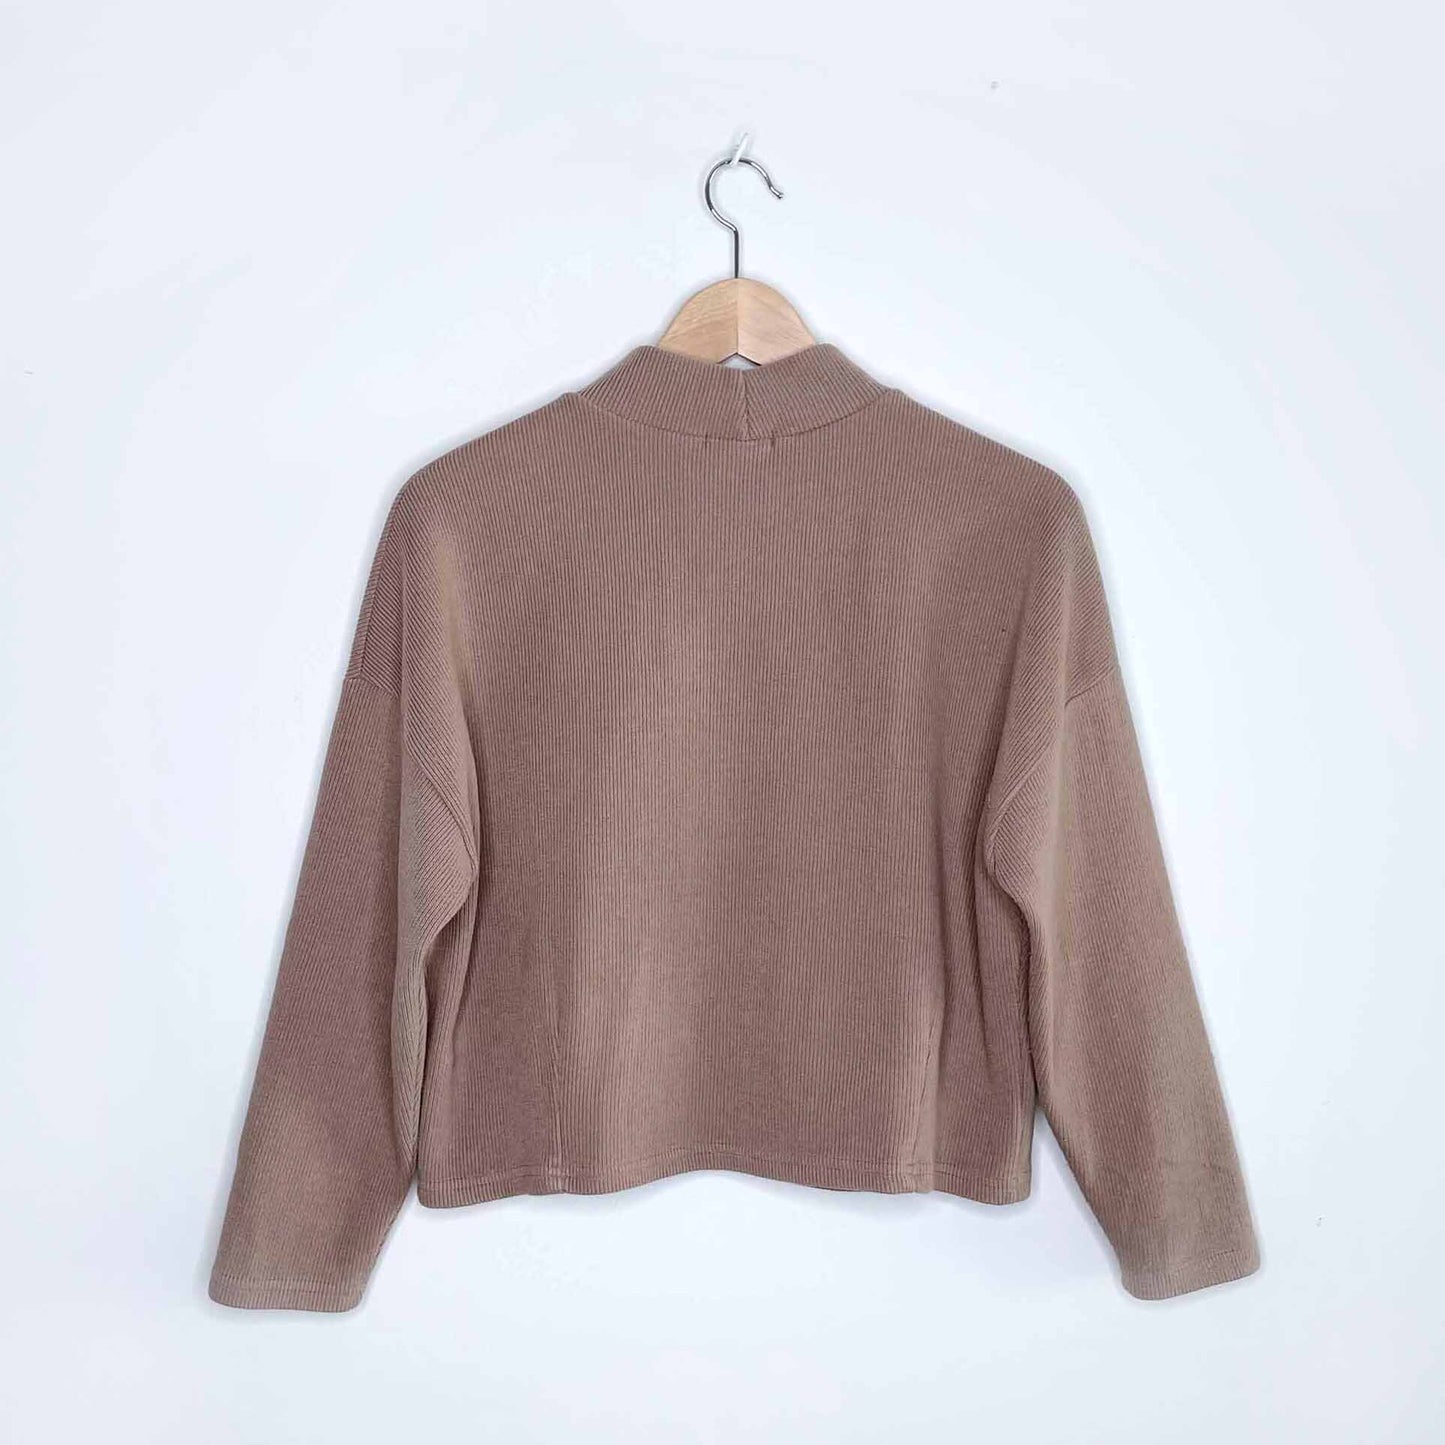 Spring Company Seoul mockneck crop sweater - size Small